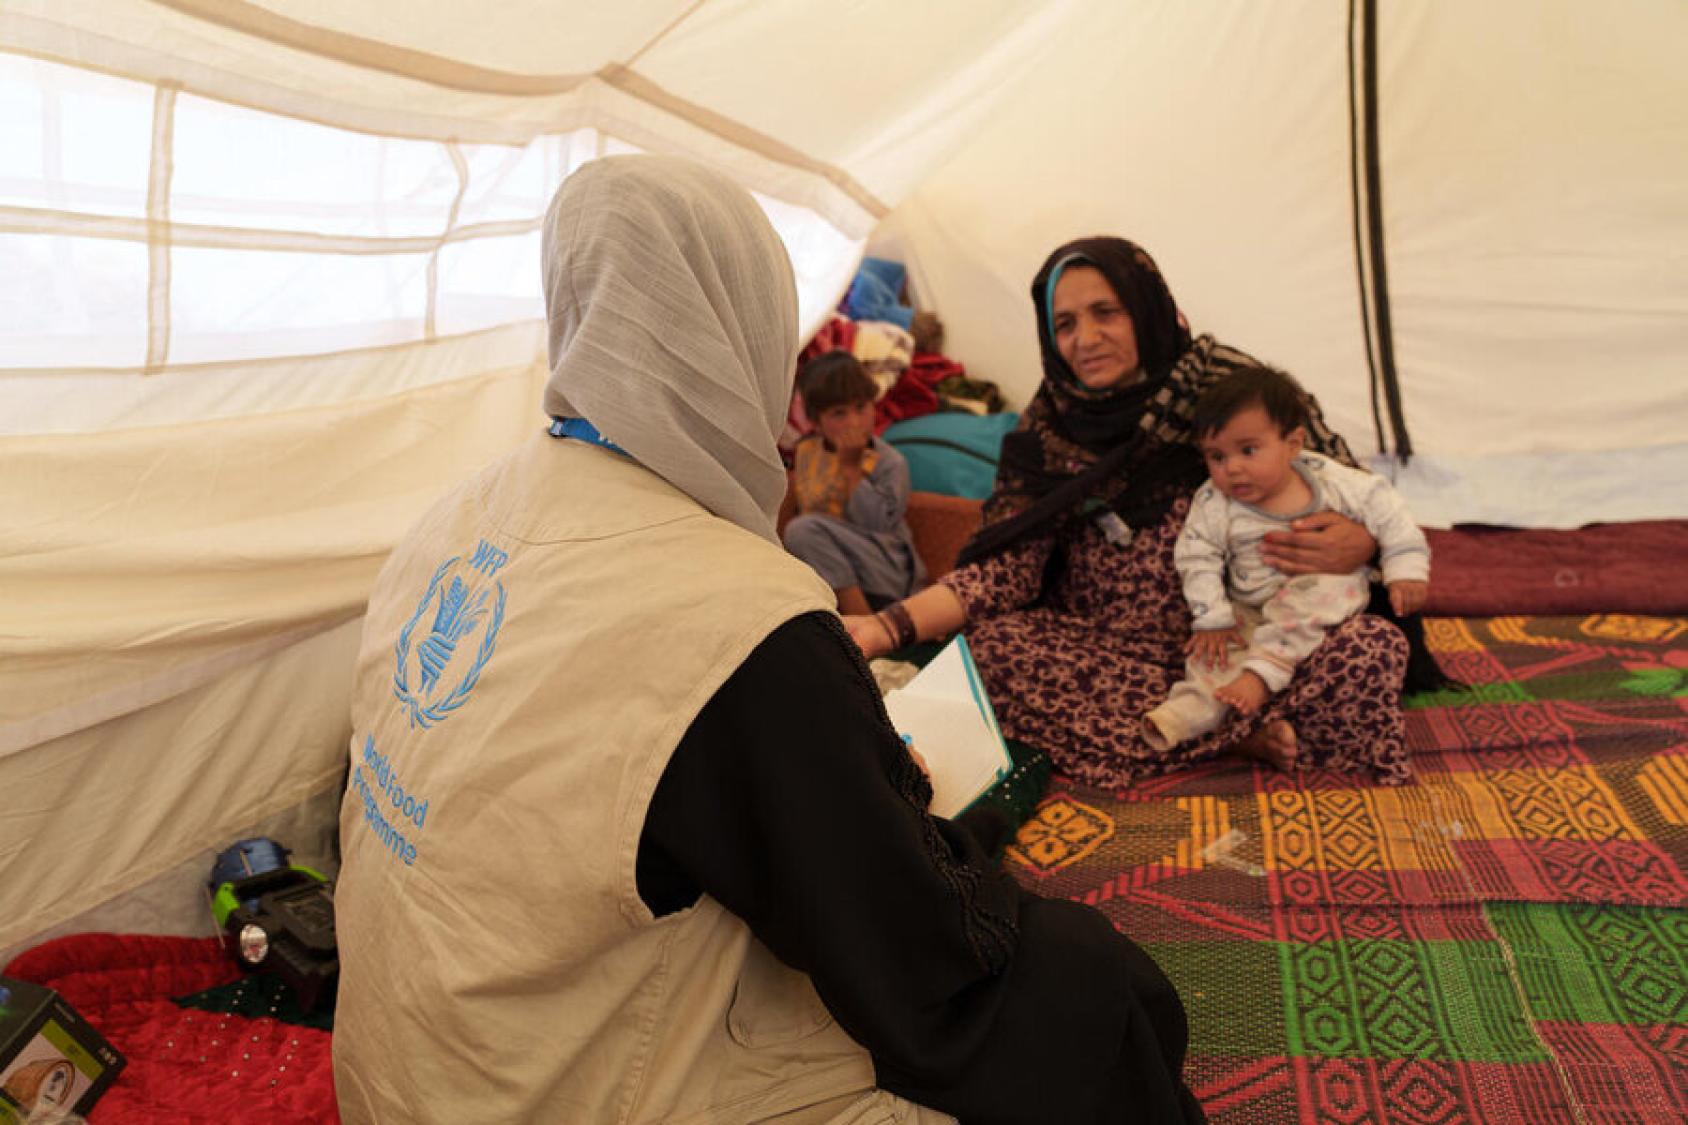 A WFP food monitor speaks to a grandmother holding a baby in a tent in Afghanistan